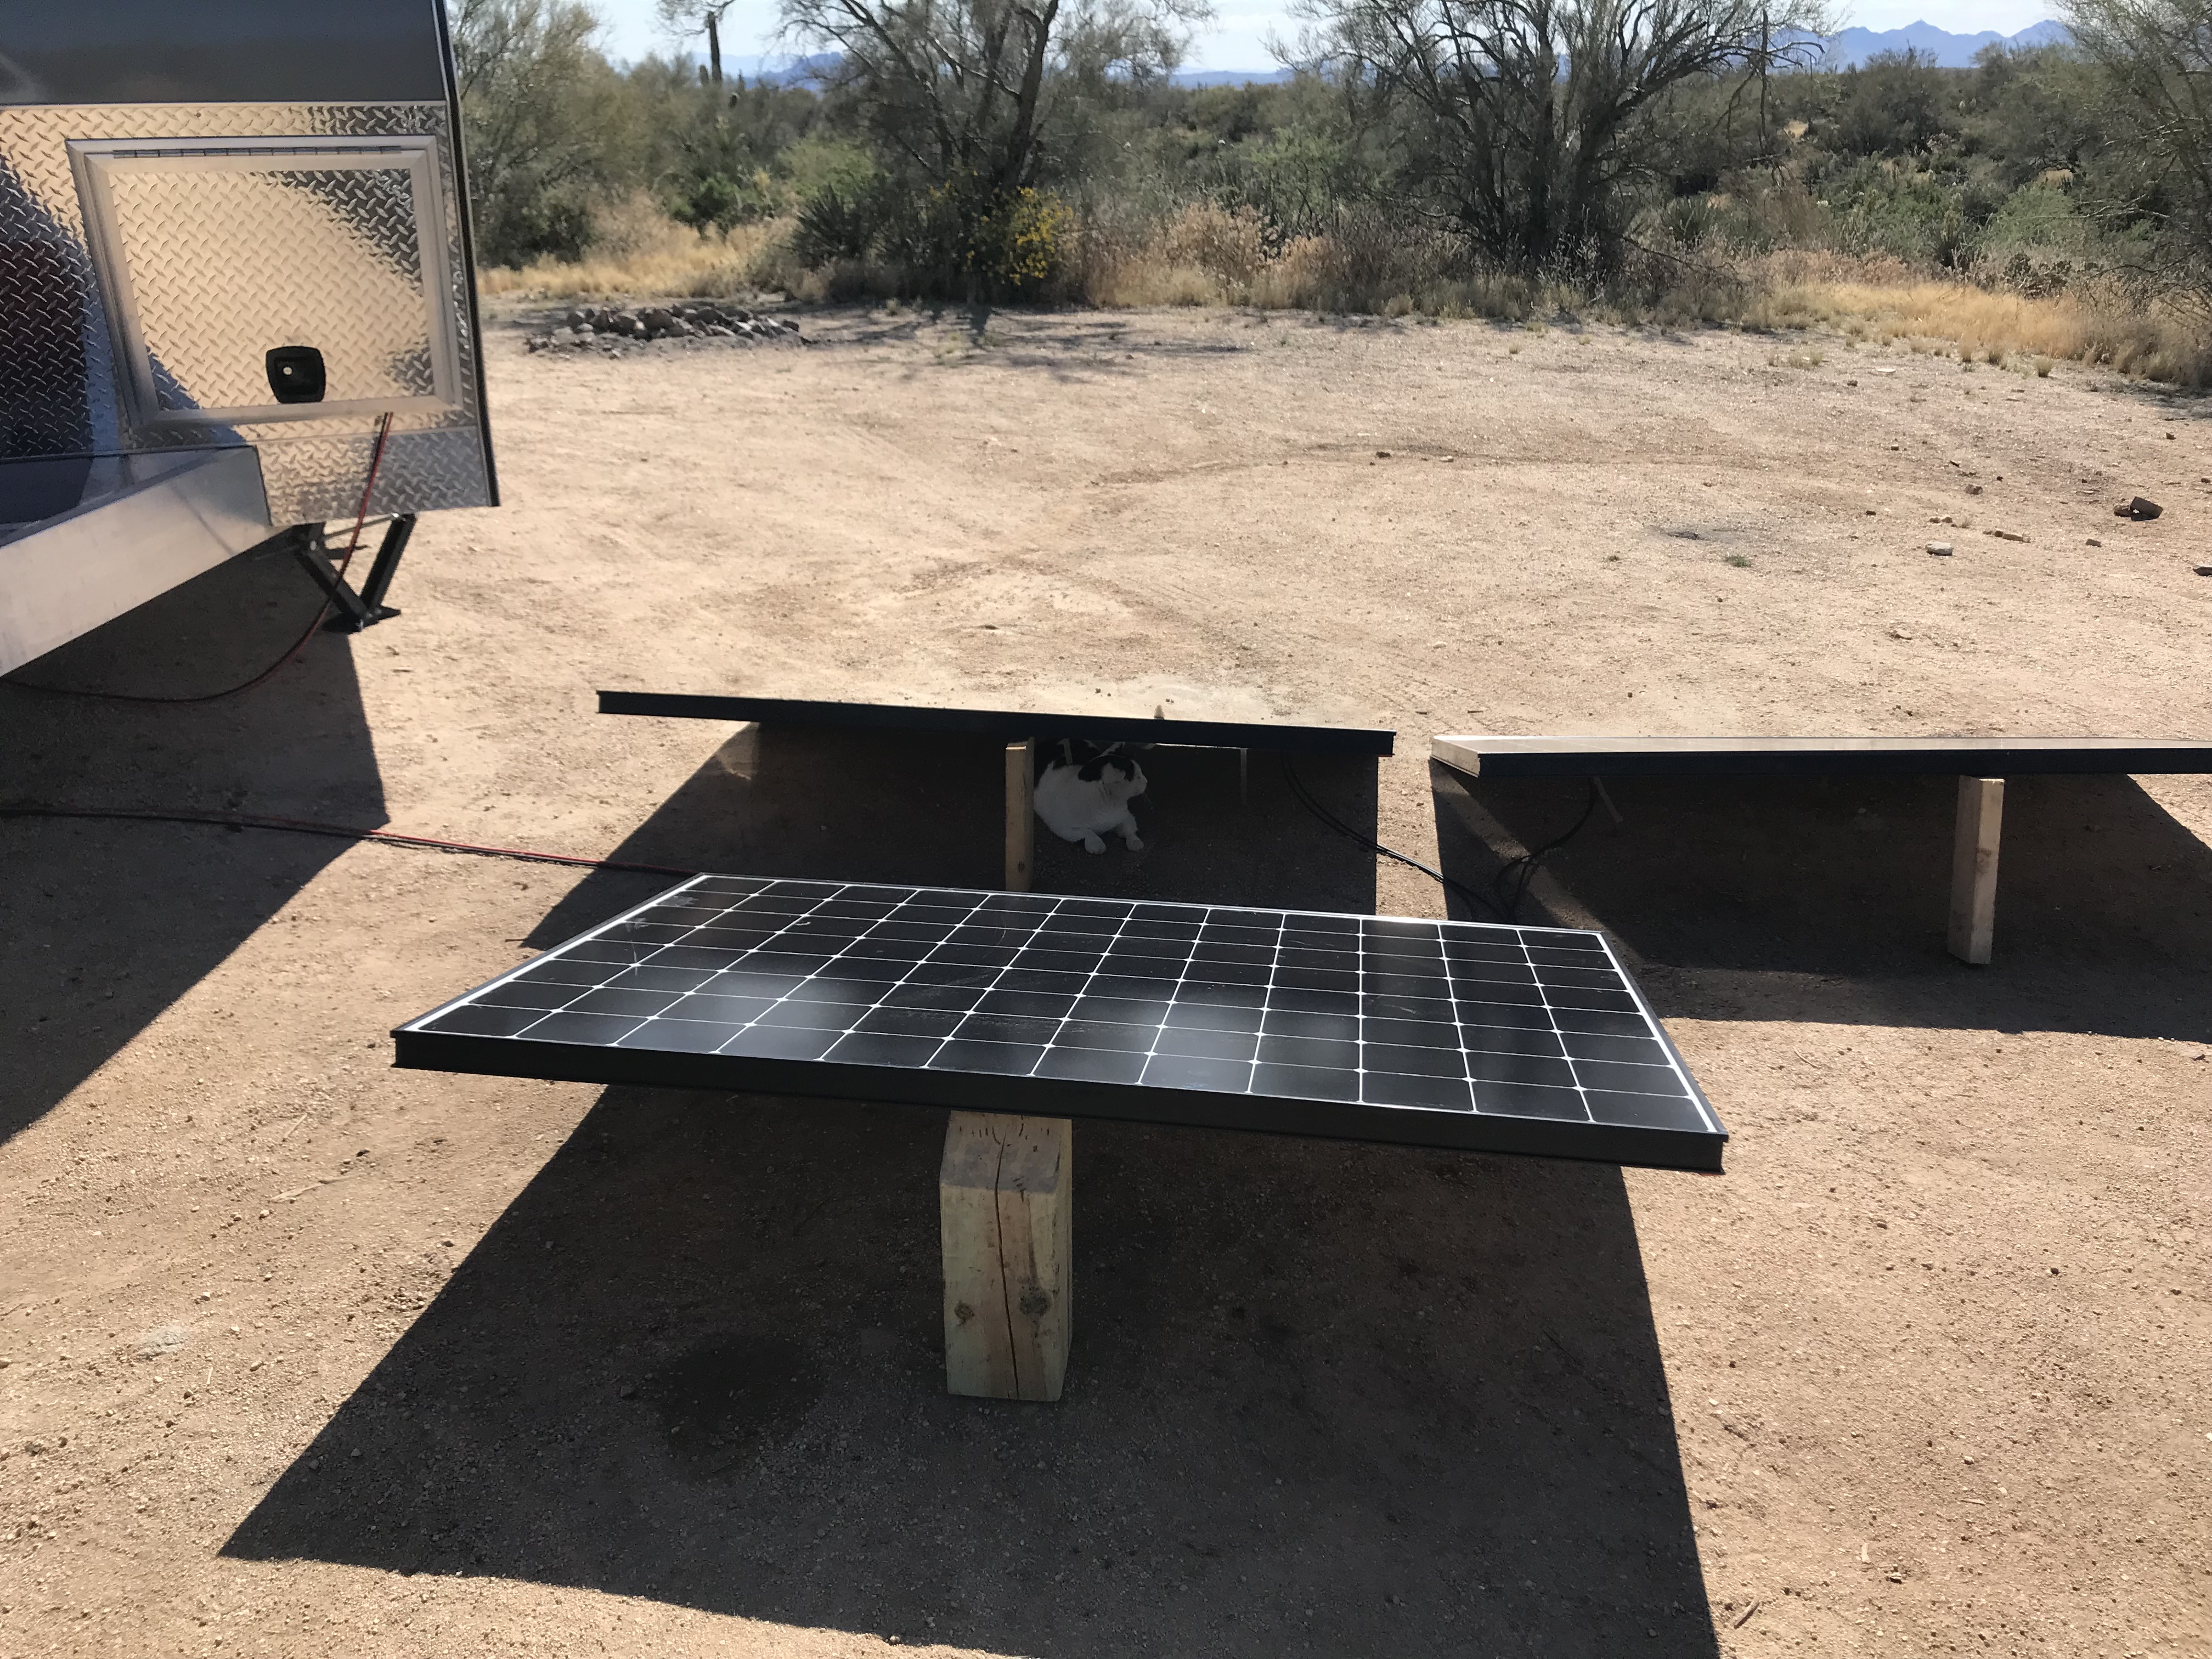 Portable Solar Panels on the Ground